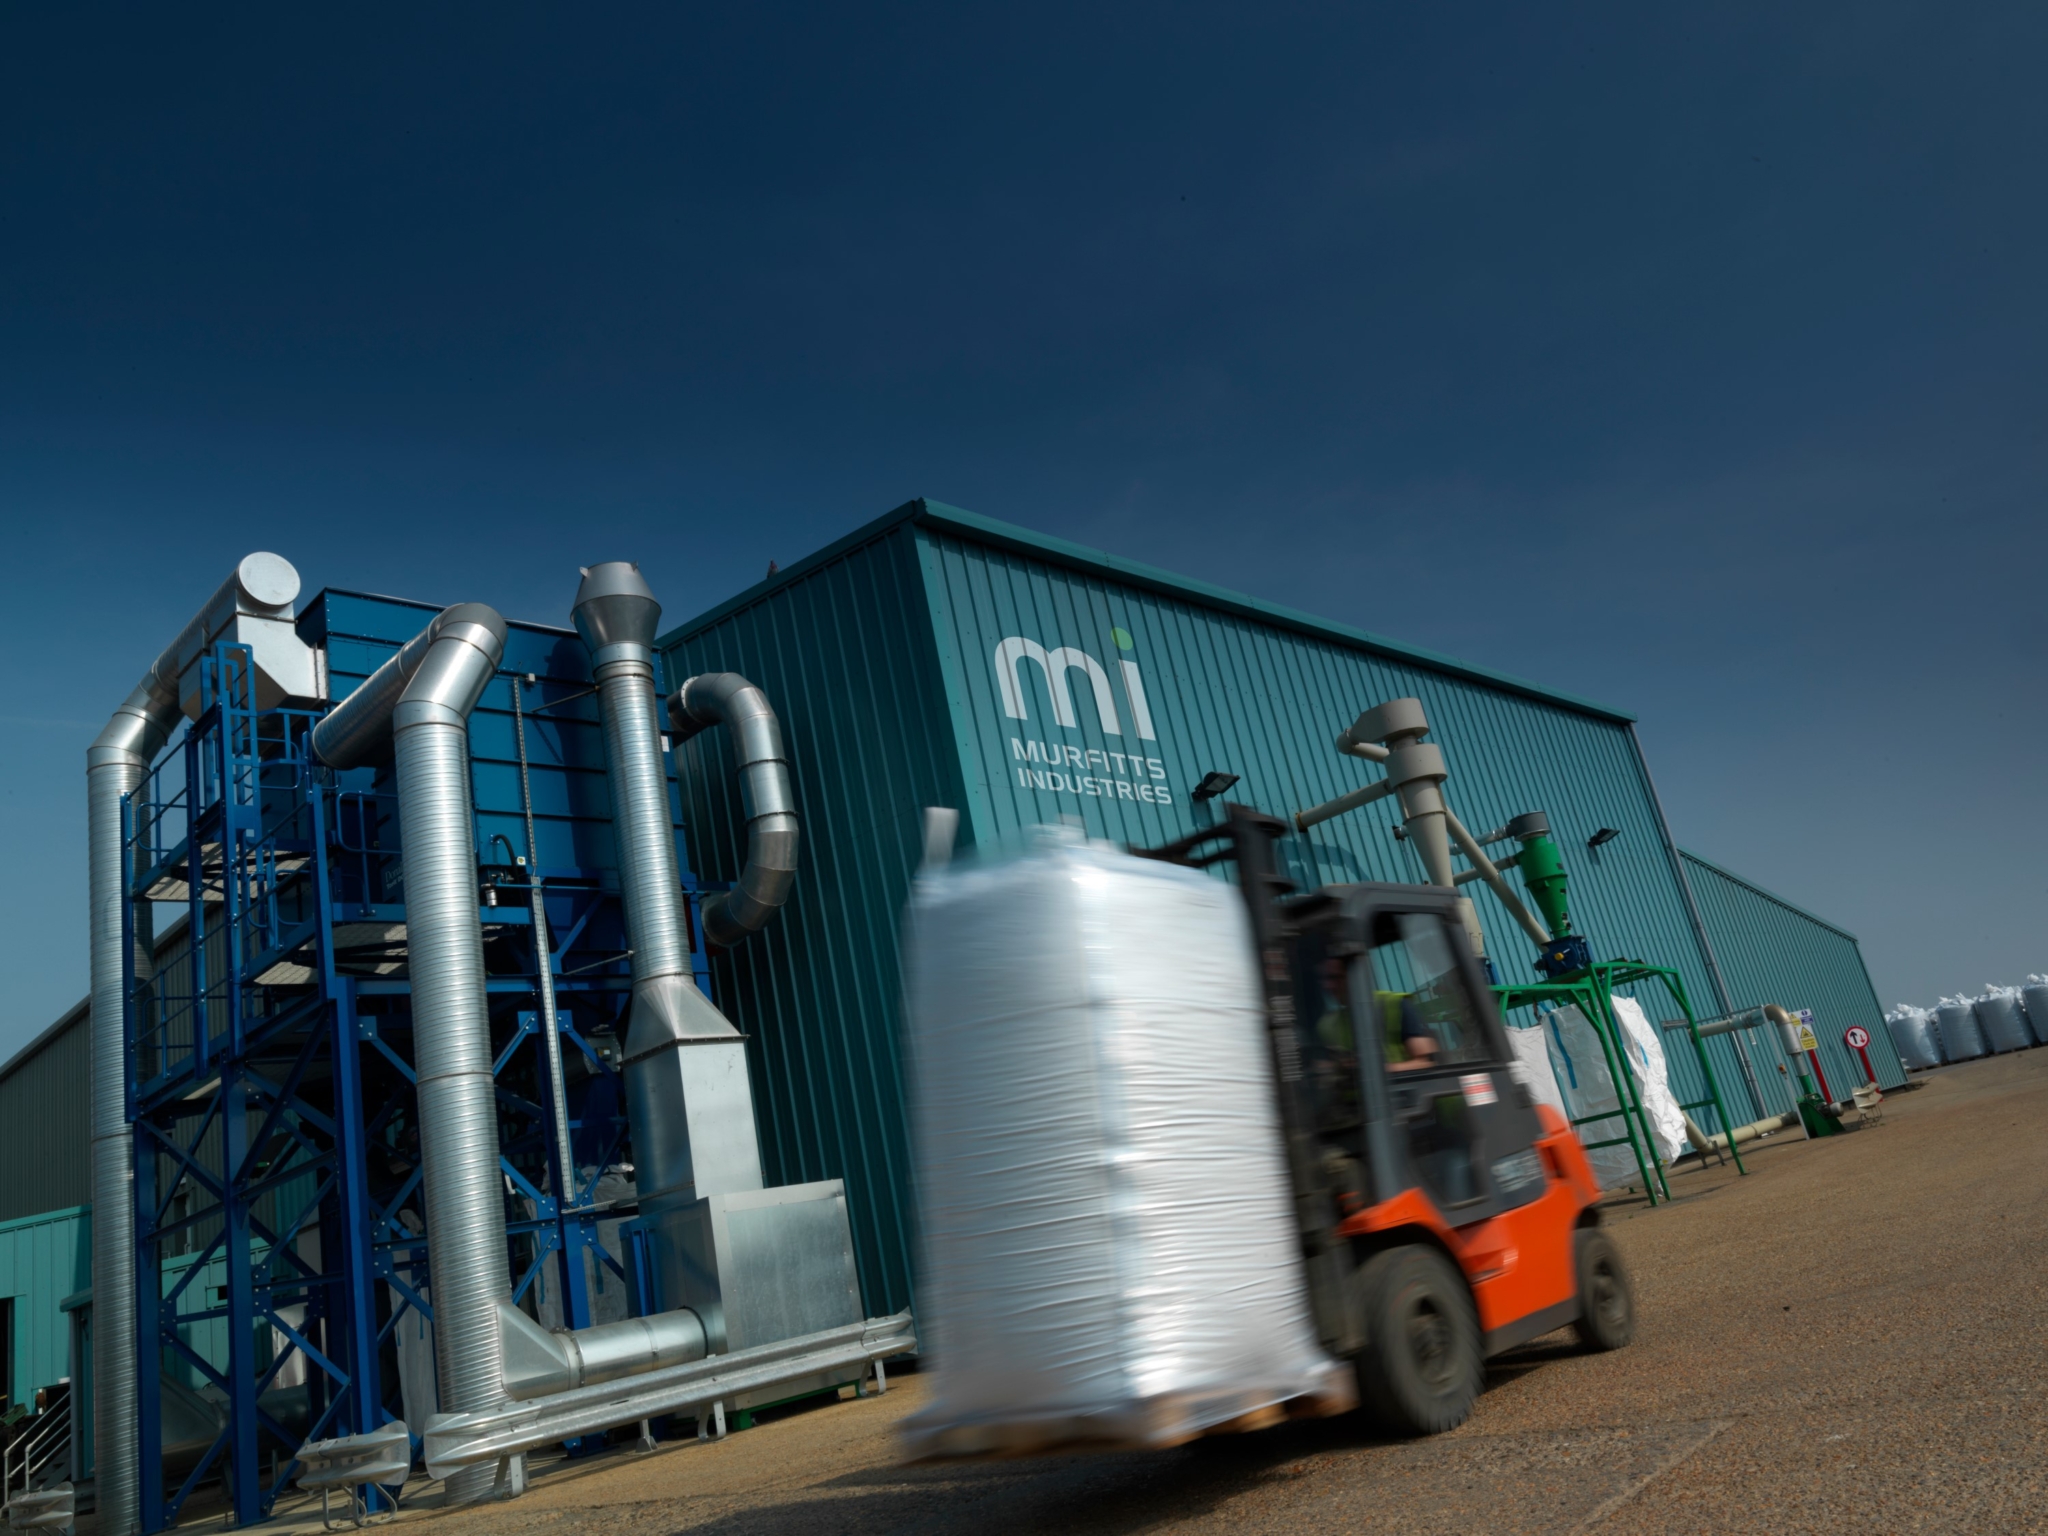 Kwik-Fit and Stapleton’s owner ETEL buys leading tyre recycling firm Murfitts